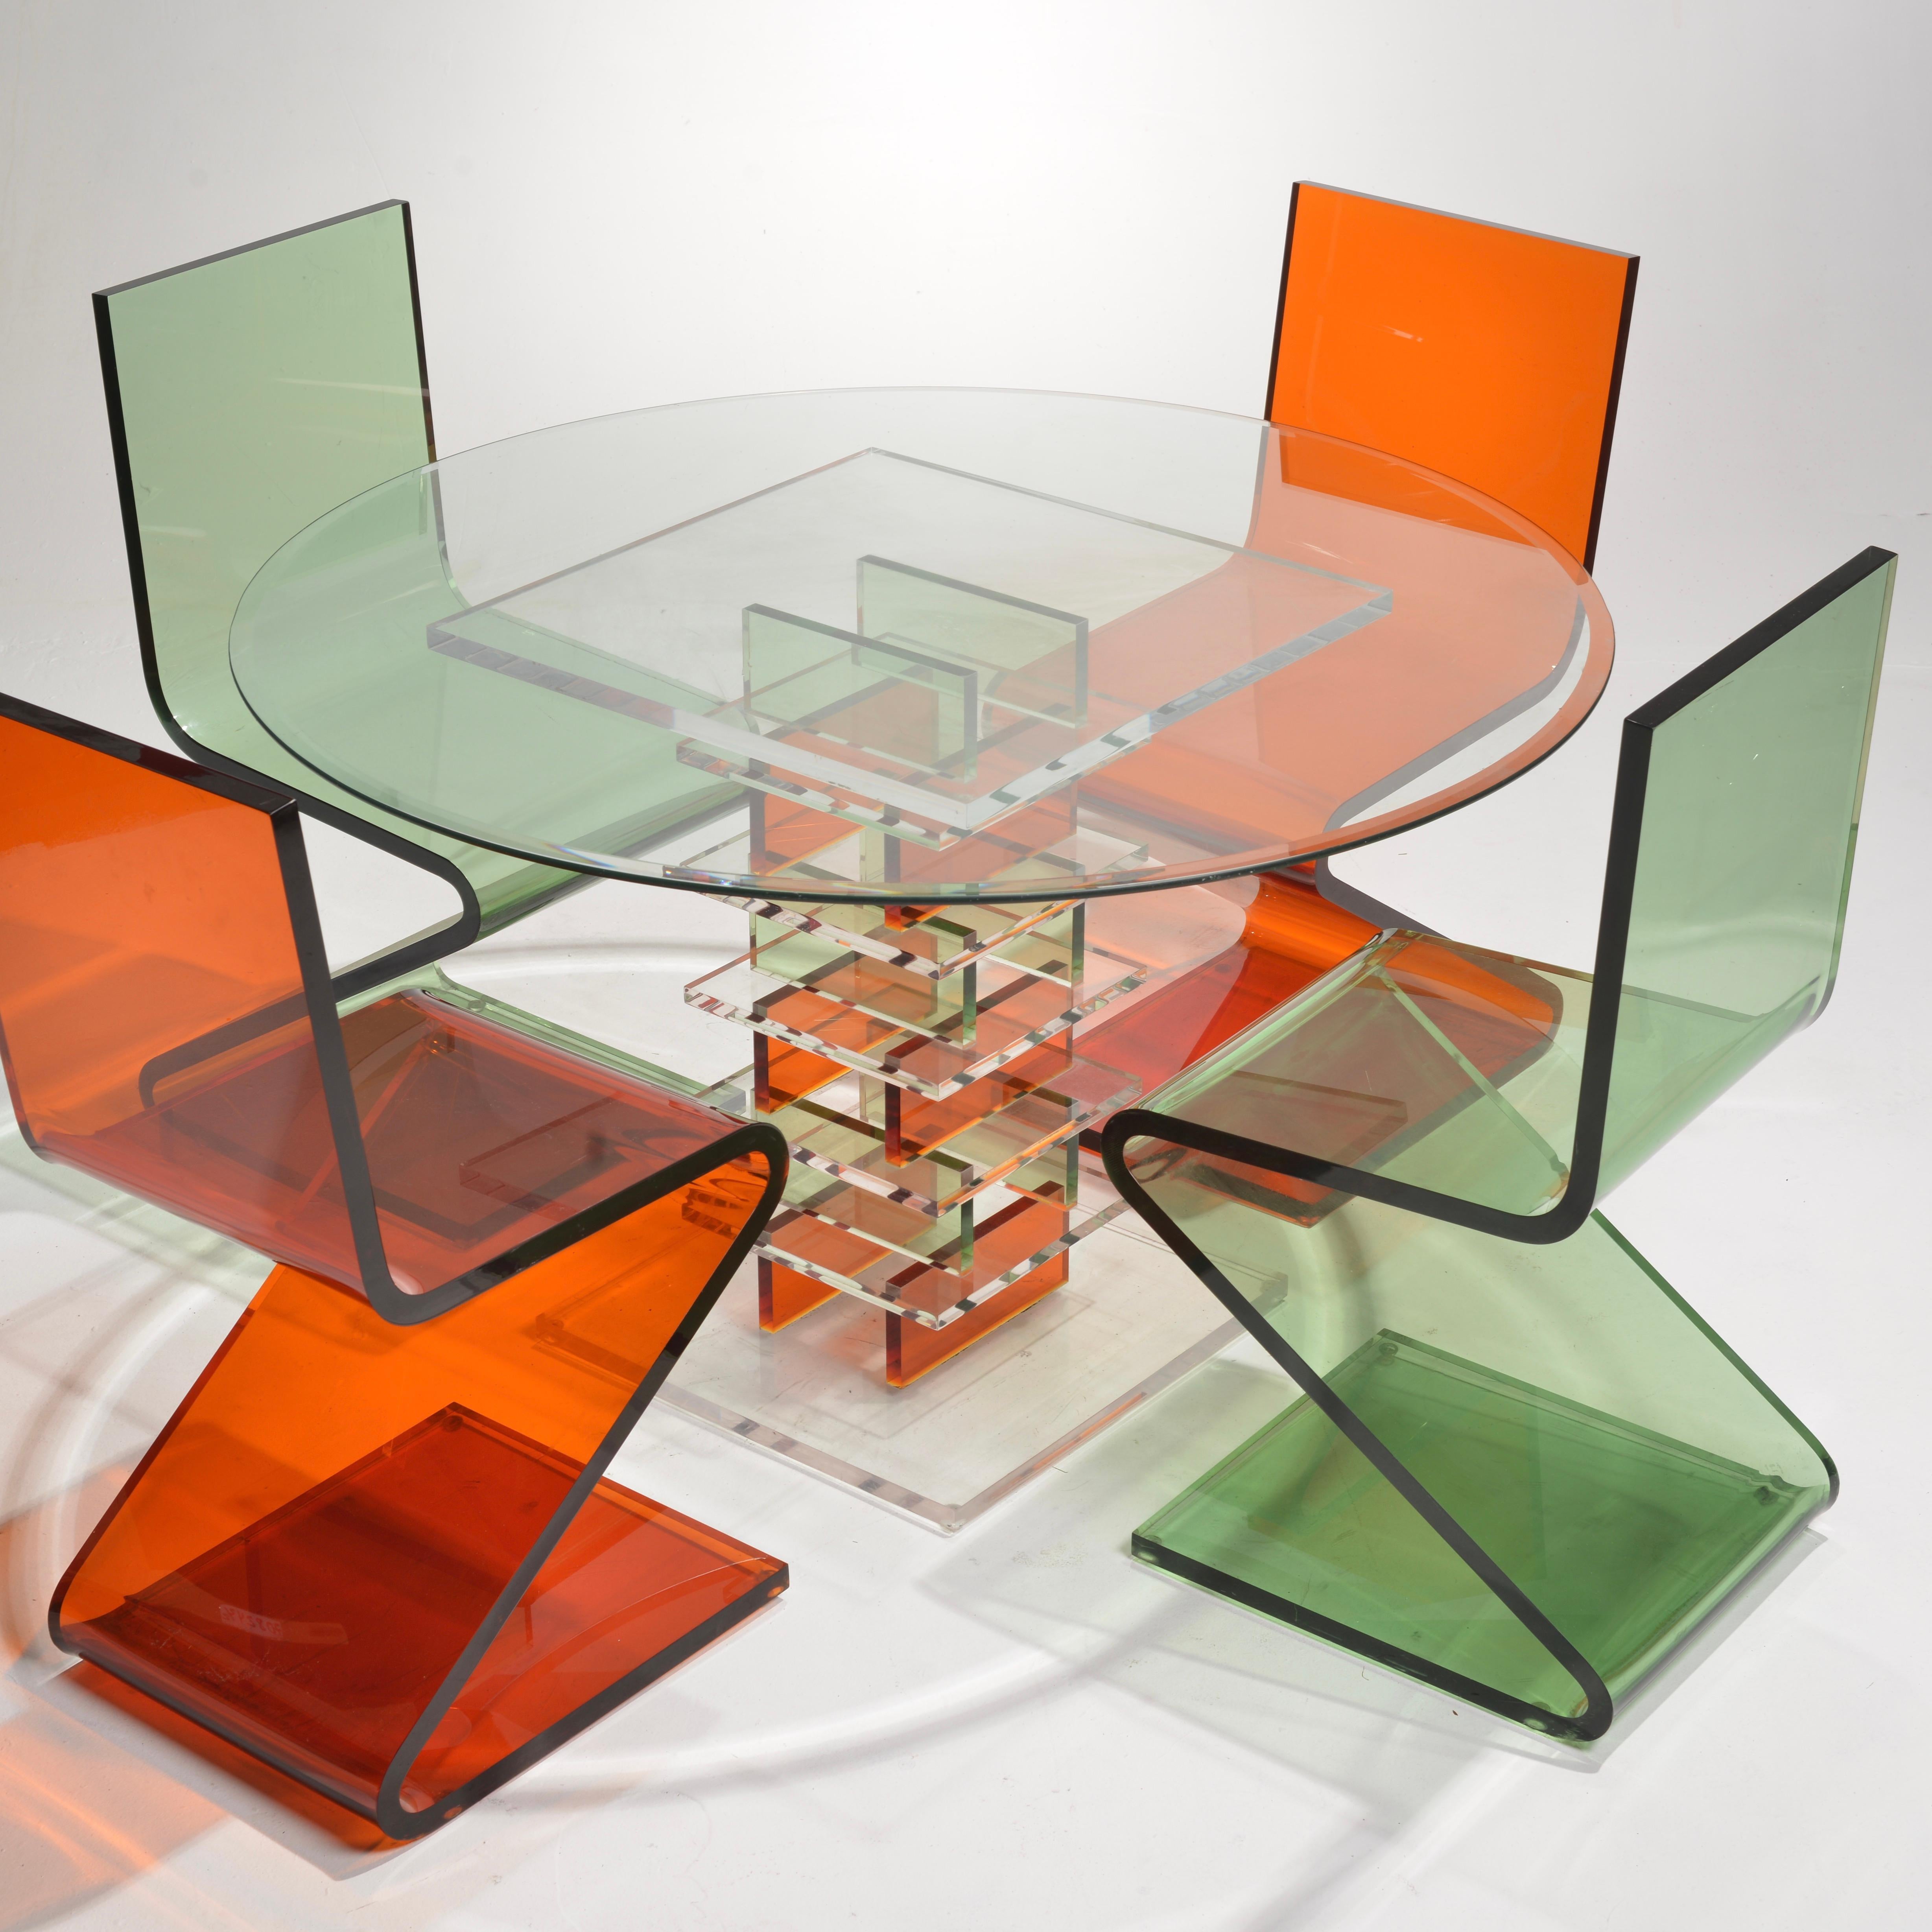 American Vintage Lucite Z Table and Z Chairs by Shlomi Haziza for H Studio For Sale